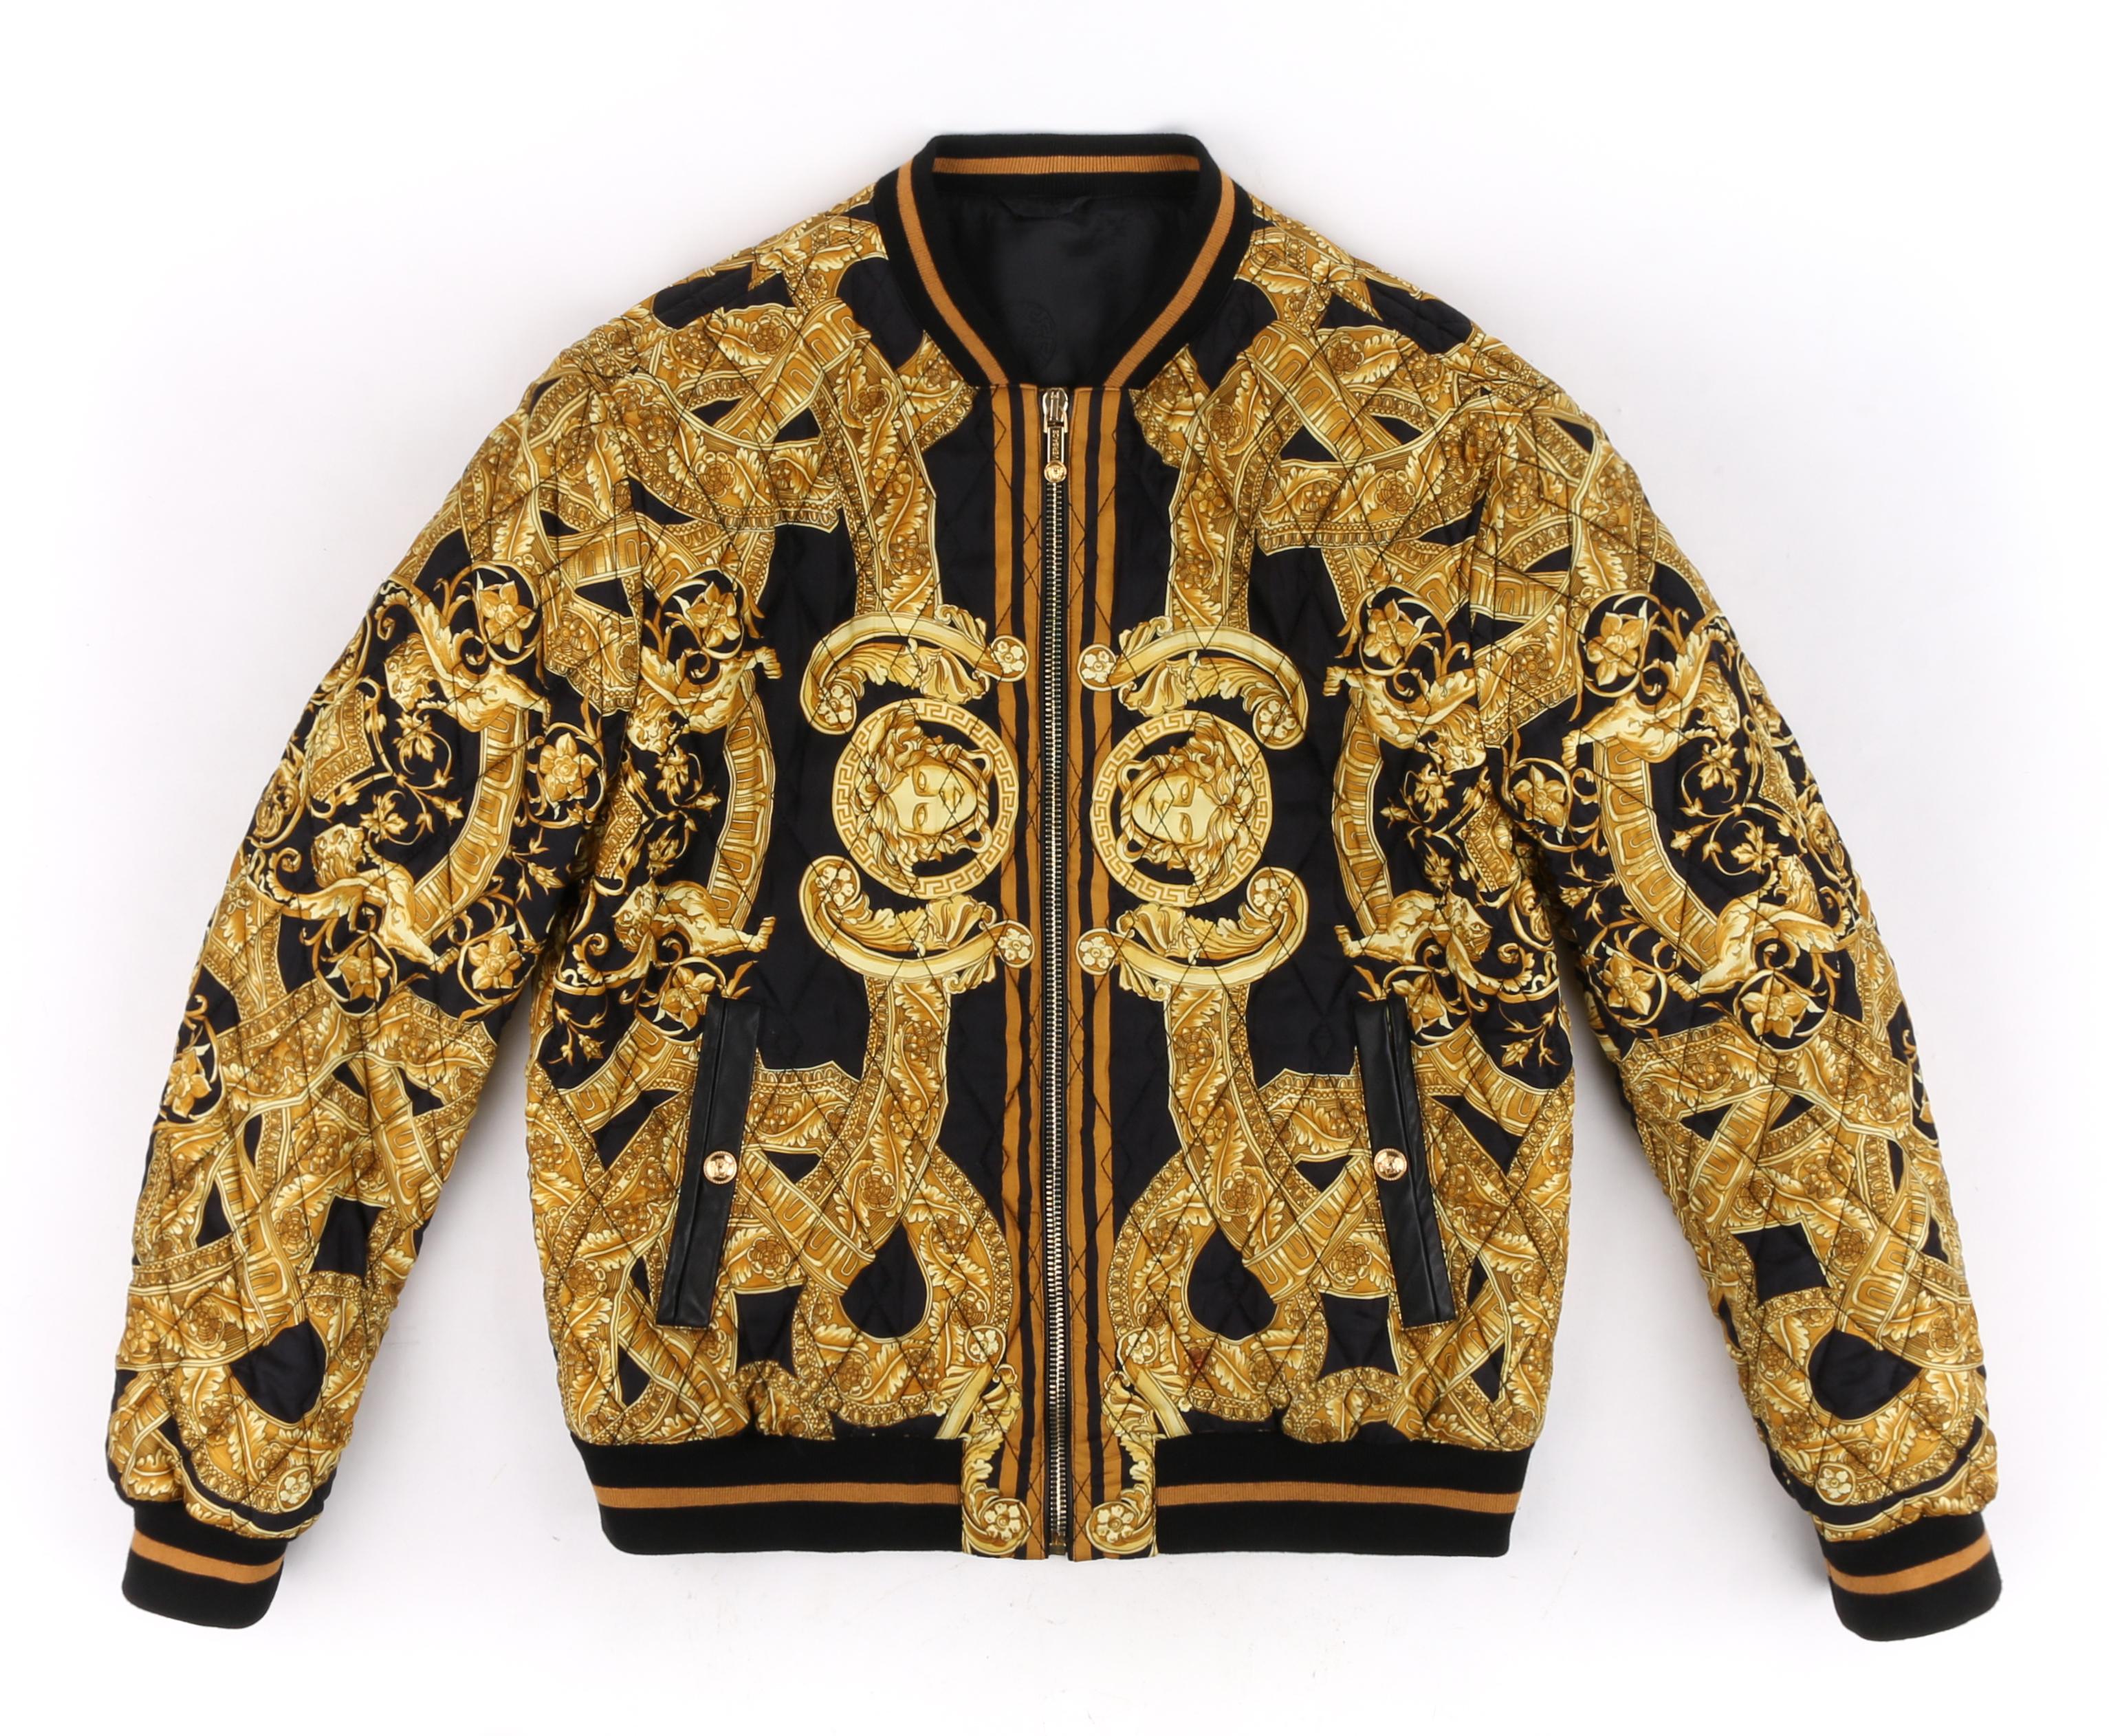 VERSACE c.2013 Gold Black Baroque Quilted Silk Zip Up Bomber Jacket
 
Brand / Manufacturer: Versace 
Style: Bomber Jacket
Color(s): Shades of gold, yellow, black and tan. 
Lined: Yes      
Marked Fabric Content: Exterior: 100% Silk; Lining: 63%